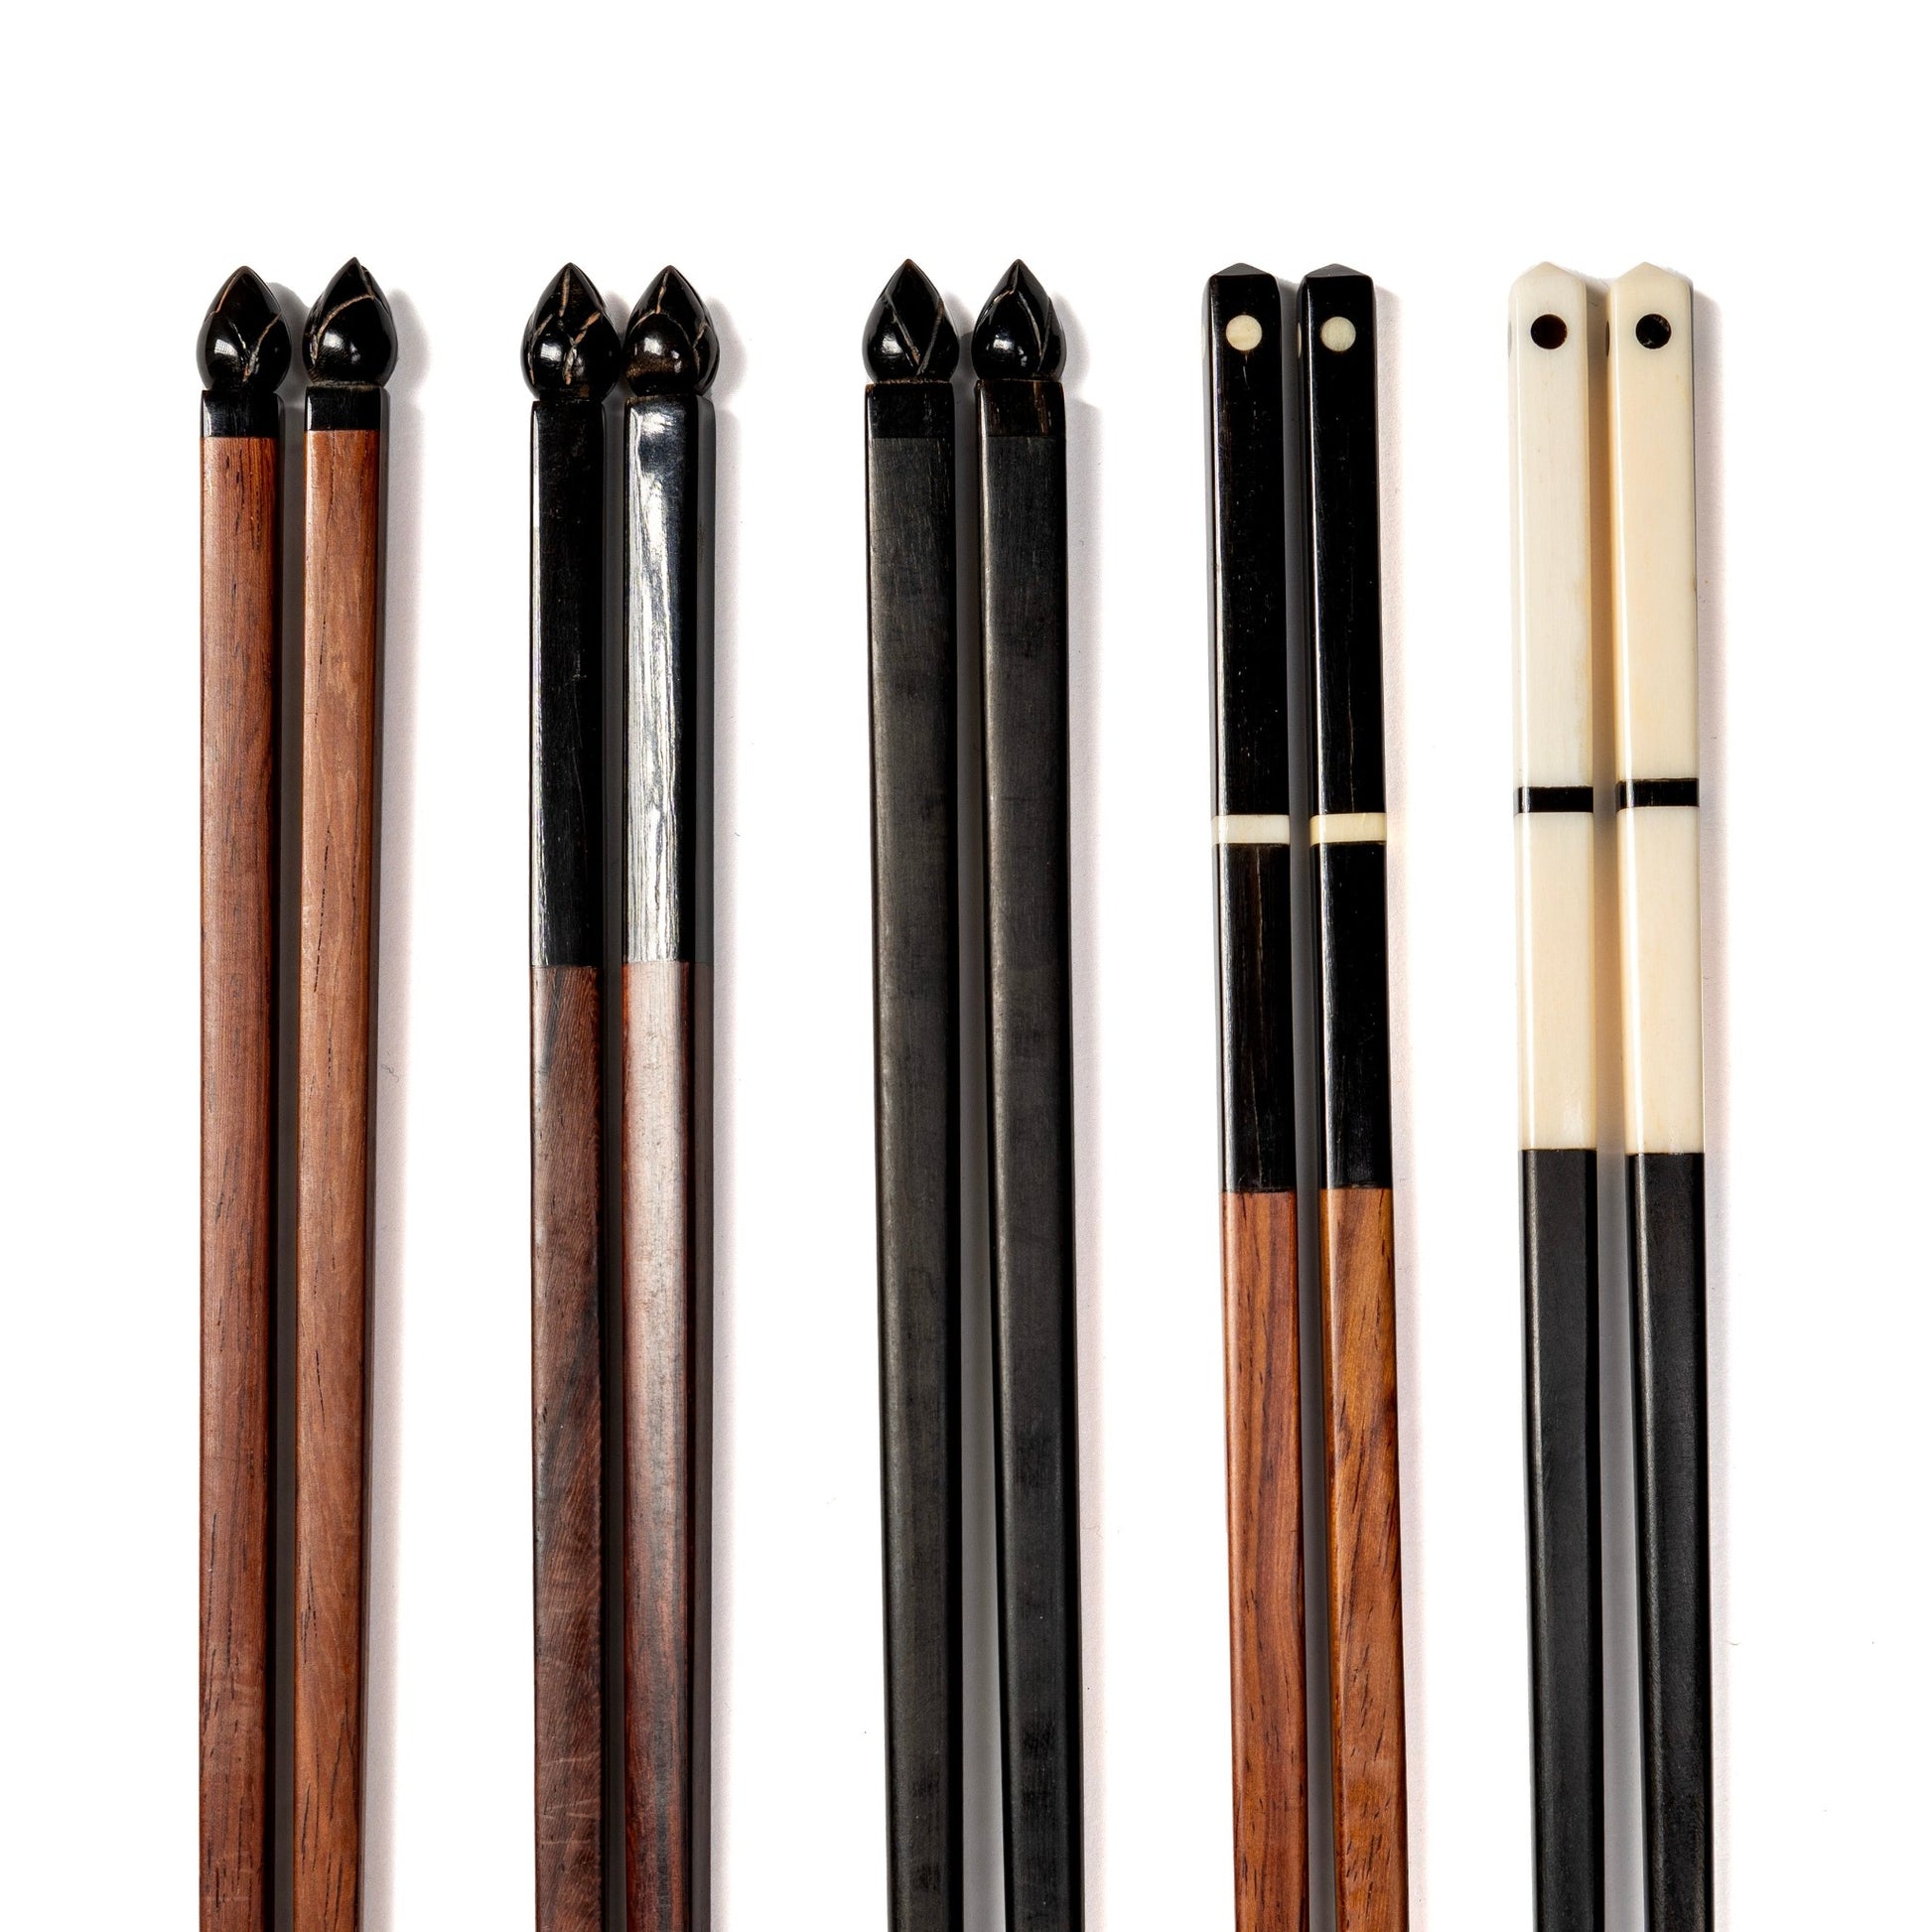 A row of 5 pairs of chopsticks made from rosewood and water buffalo horn, each with a different tip.